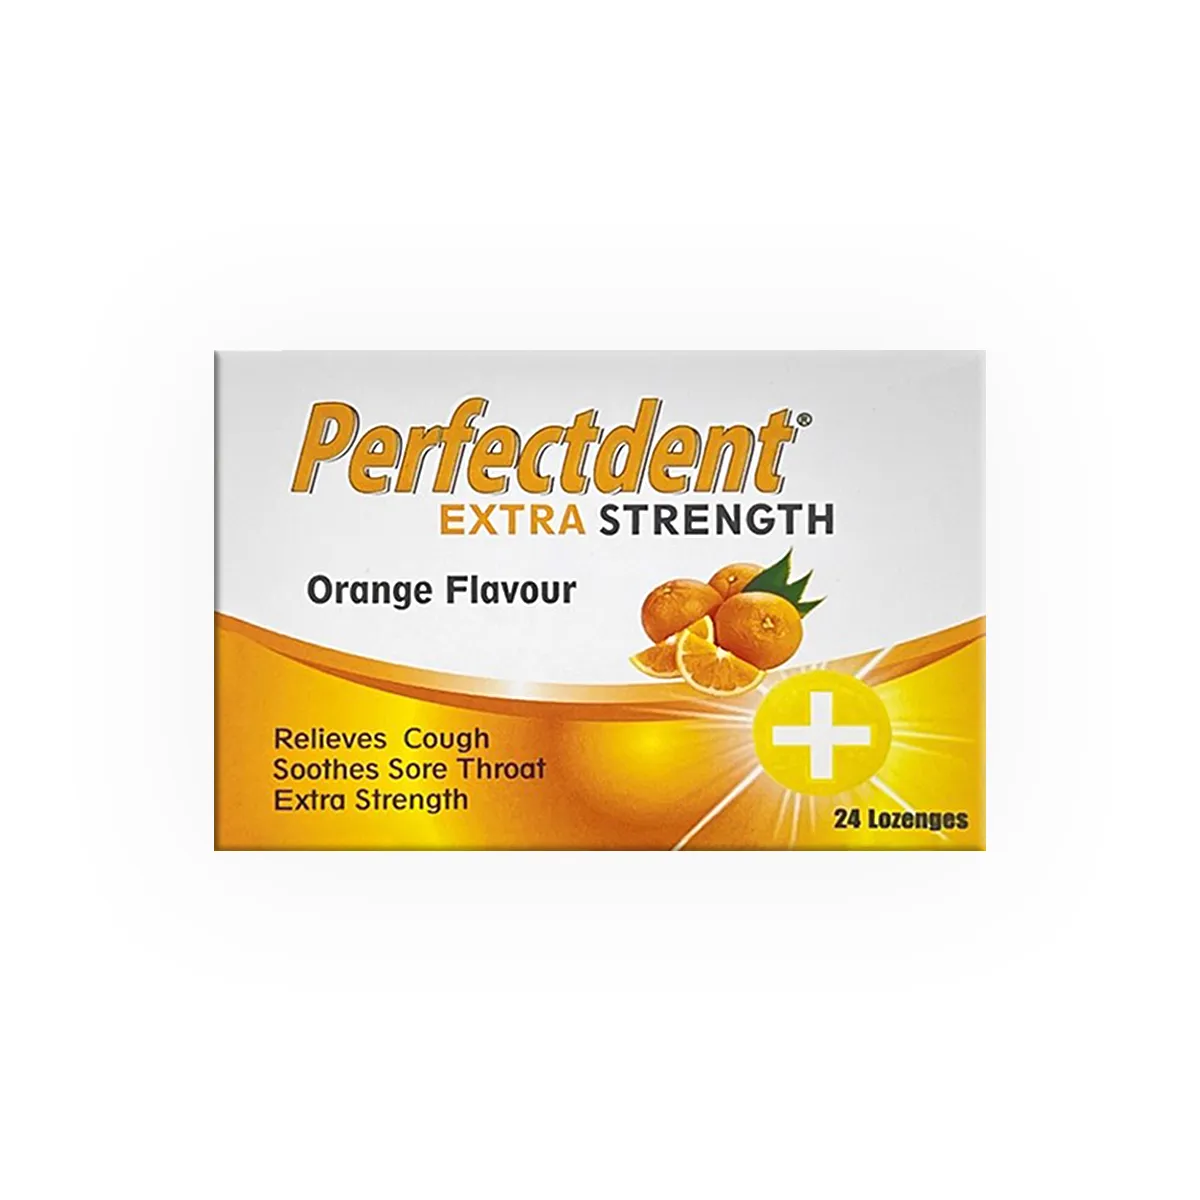 First product image of Perfectdent Extra Strength Lozenges 24s - Orange